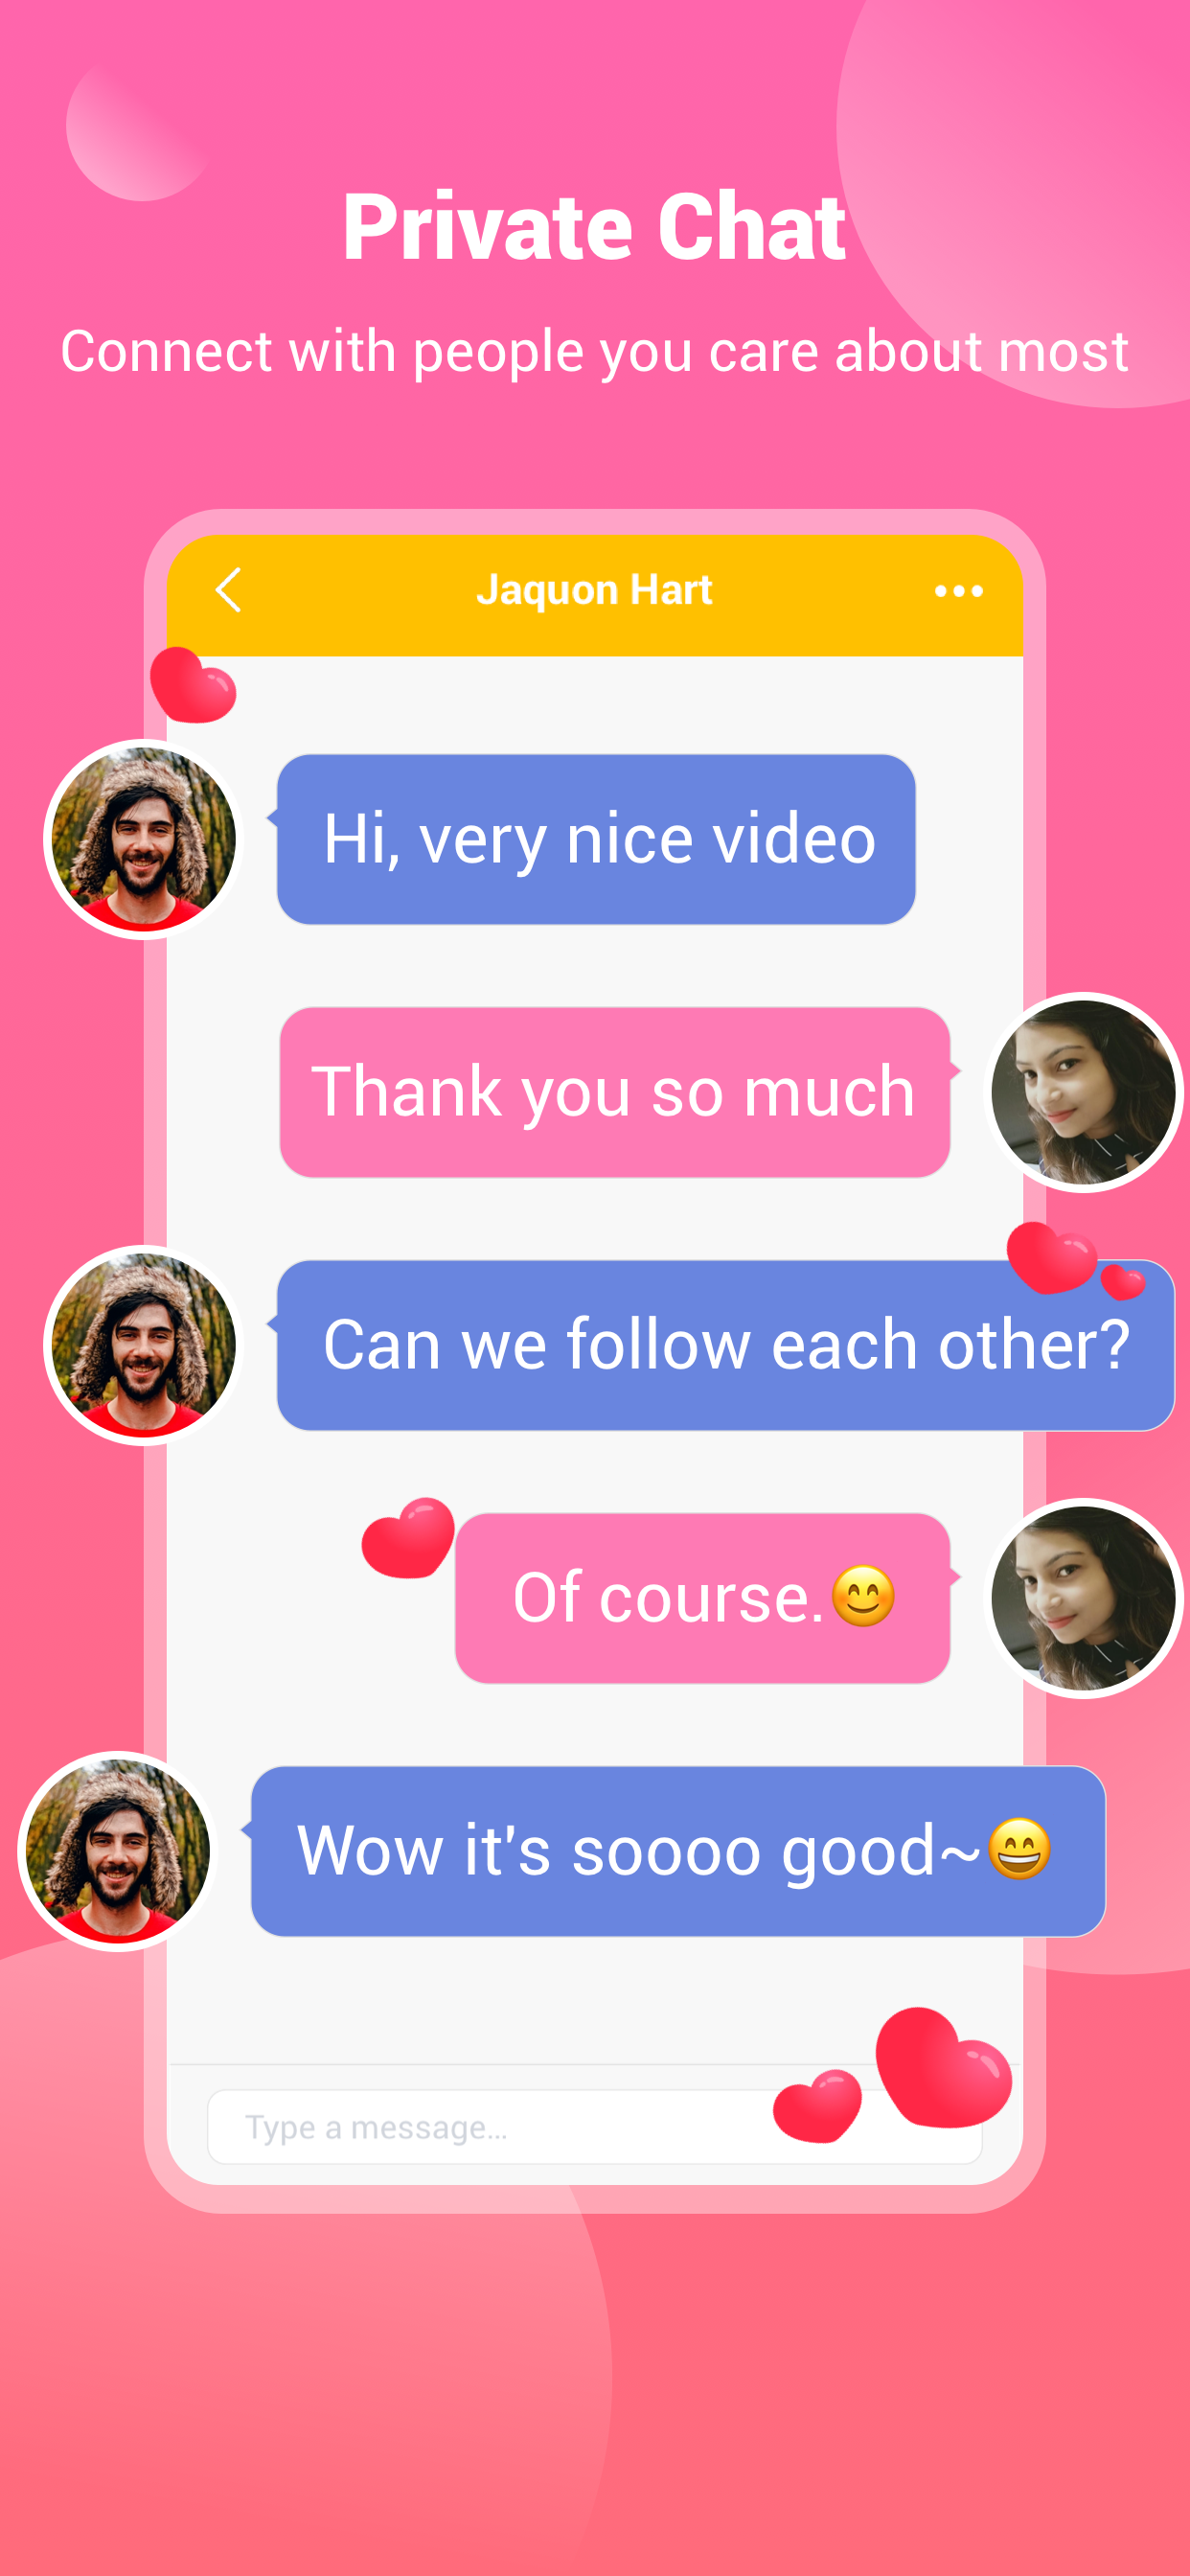 4Fun - Voice Chat Room, Ludo, Funny Video, APK  for Android – Download  4Fun - Voice Chat Room, Ludo, Funny Video, XAPK (APK Bundle) Latest Version  from 